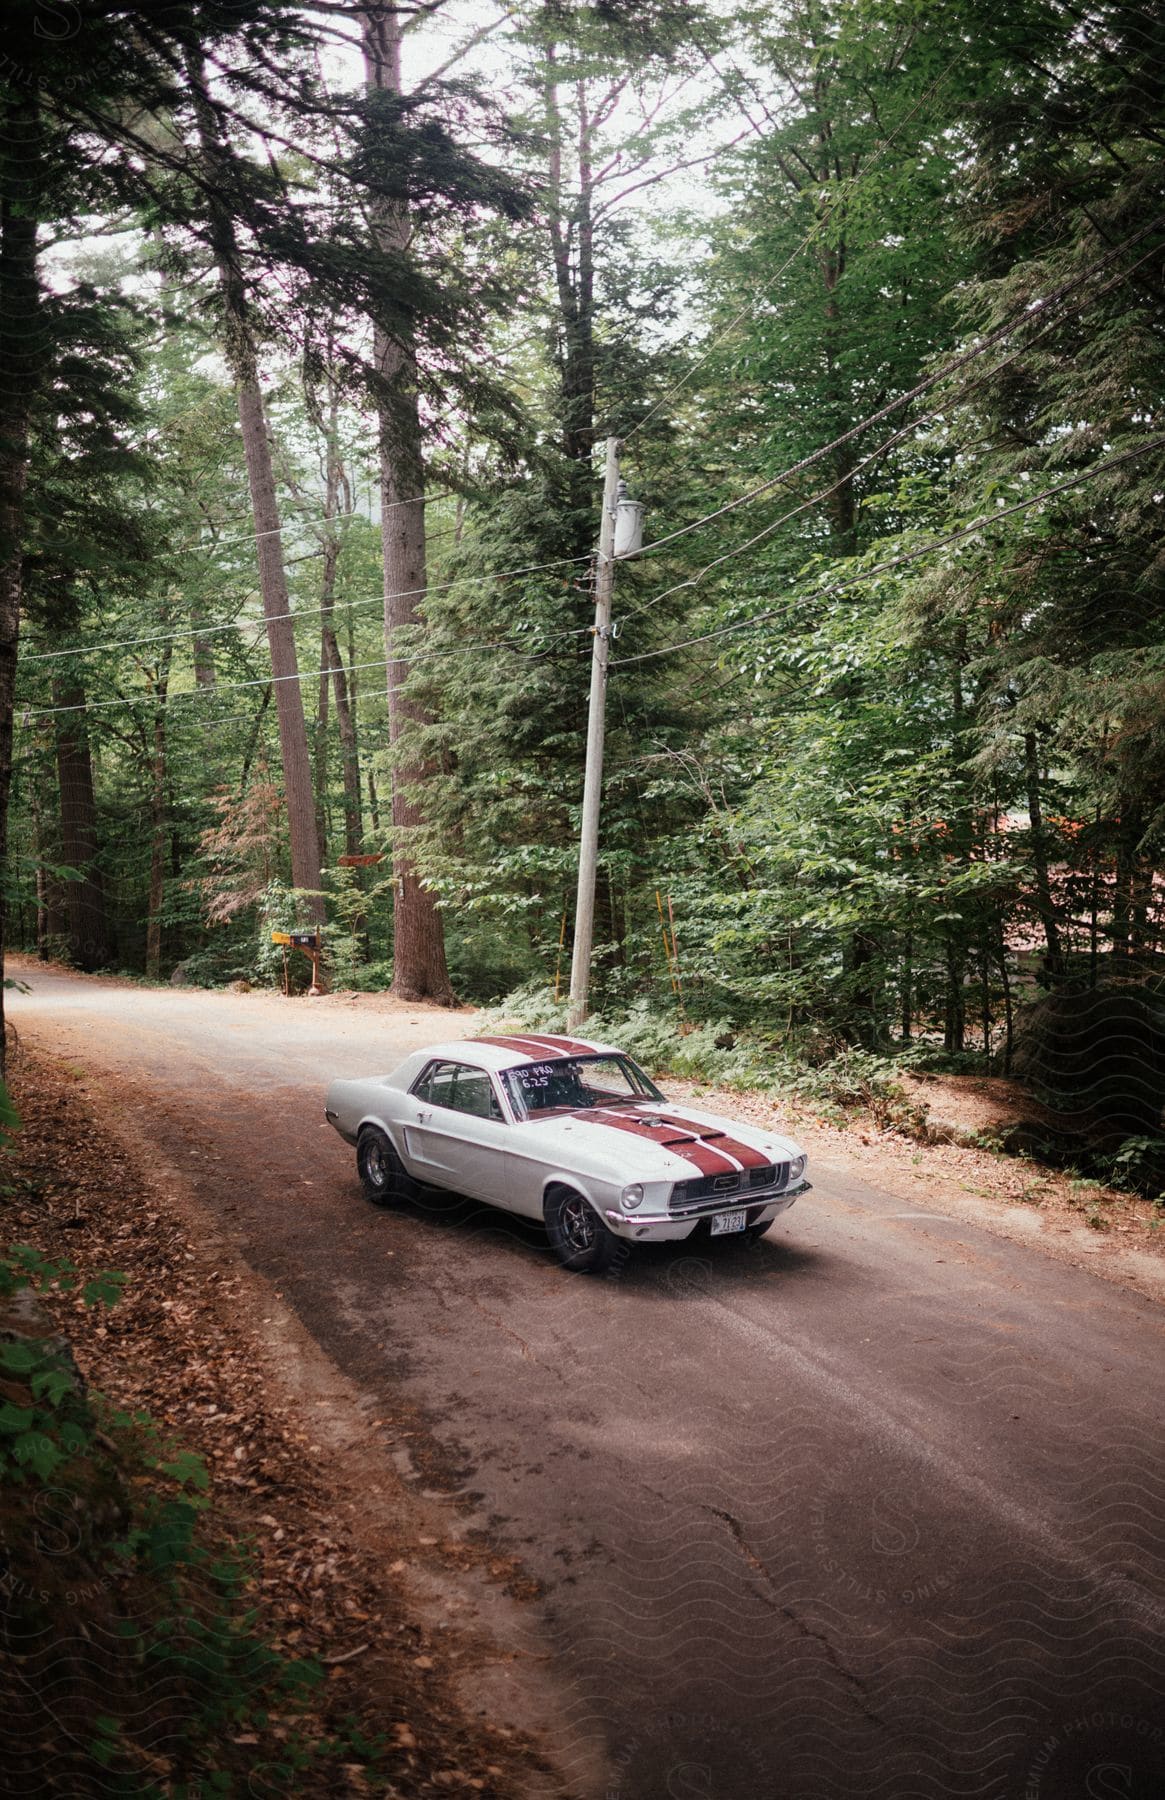 A white racecar with a red stripe down the middle is parked on a road in the woods.